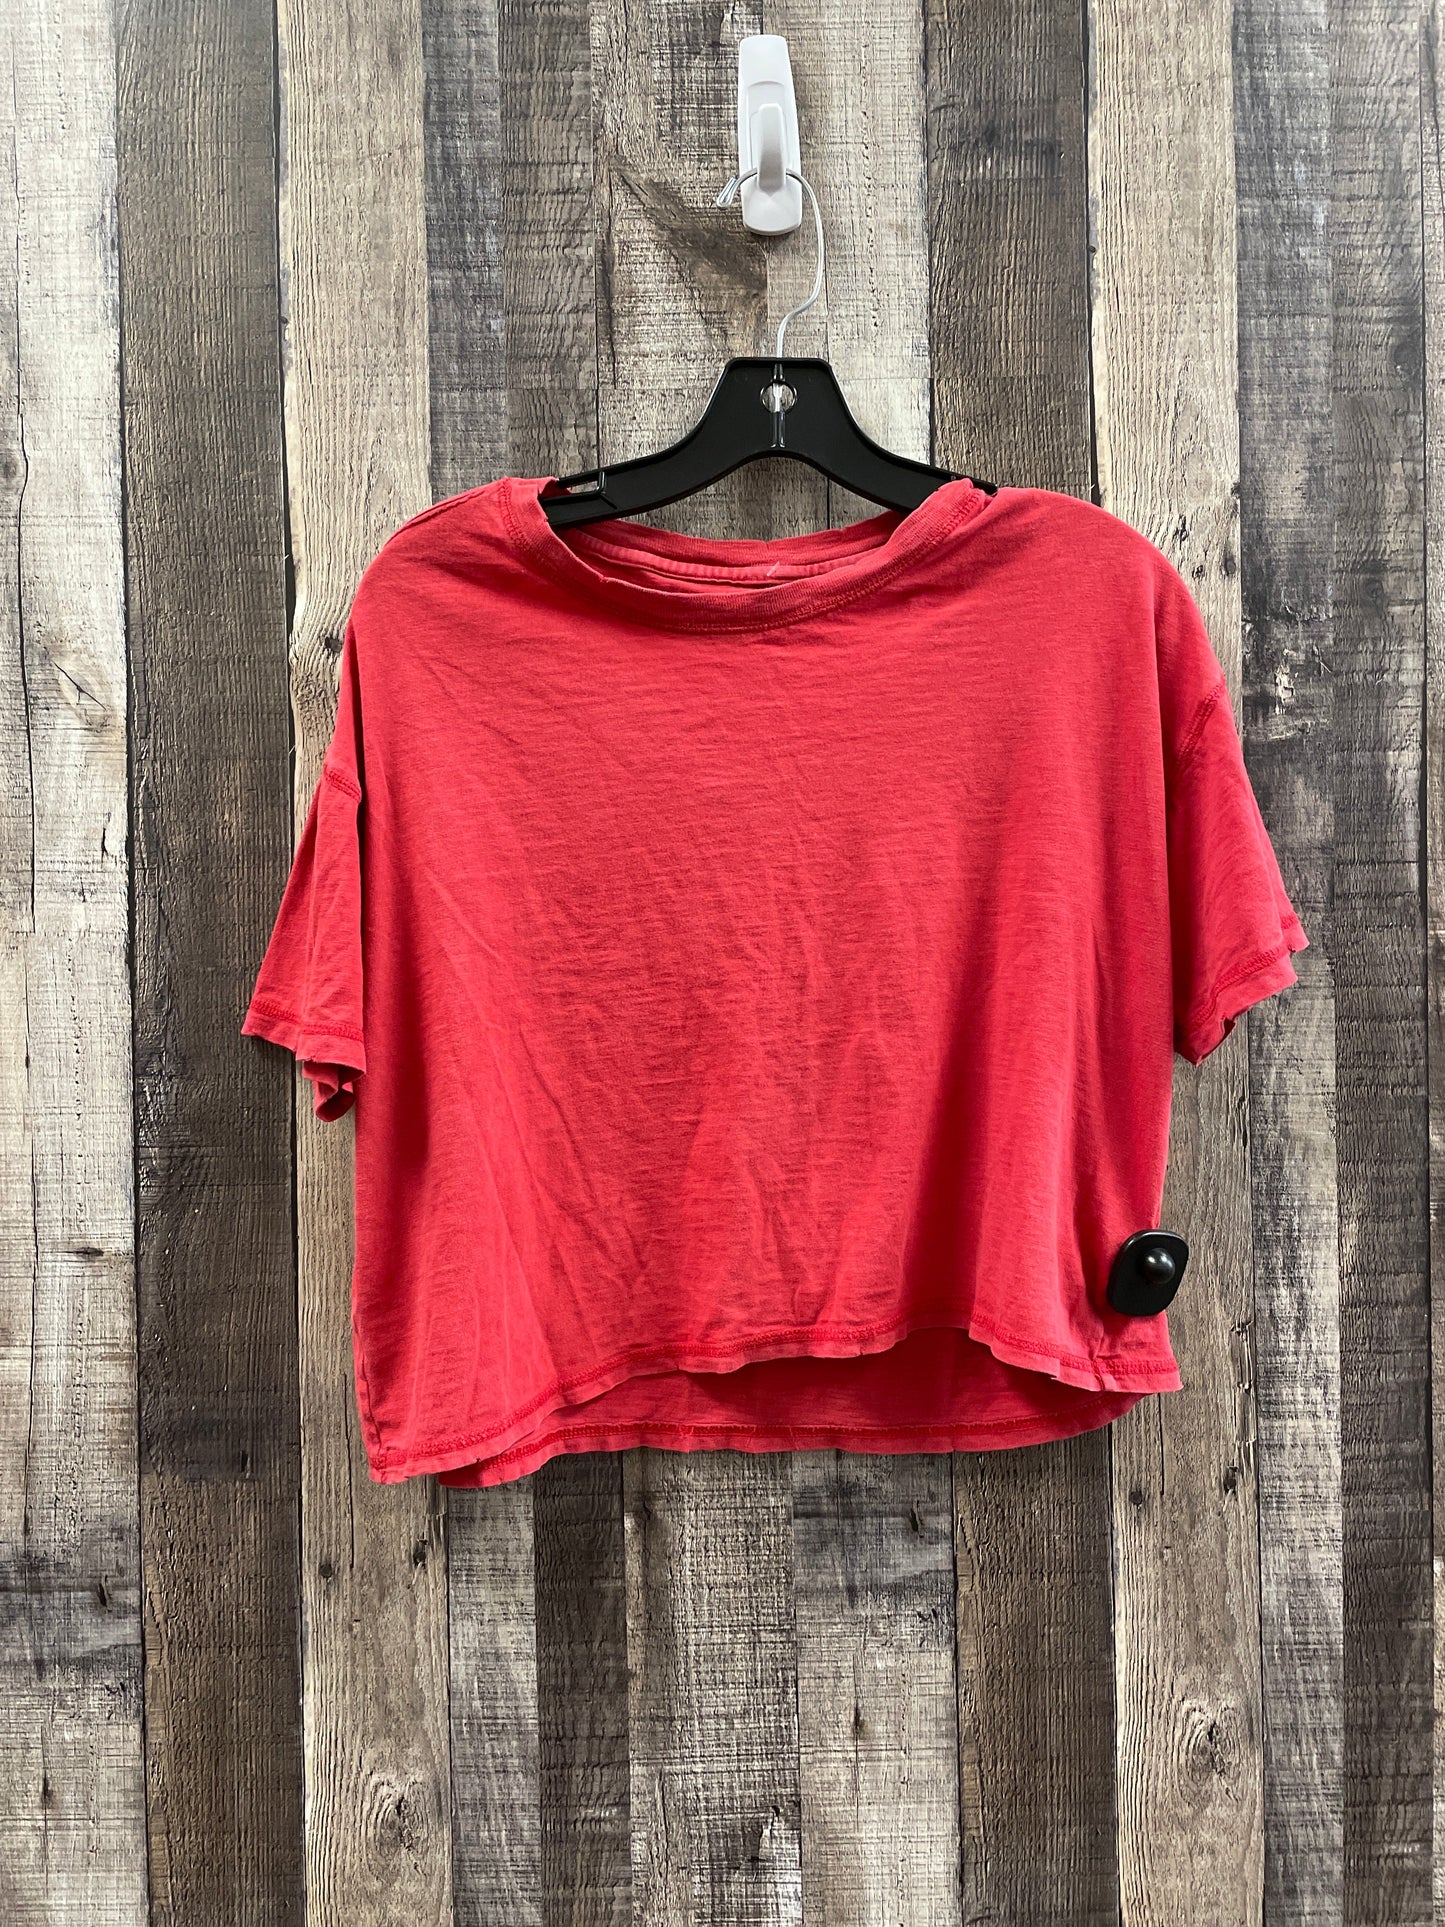 Red Top Short Sleeve Aerie, Size Xs